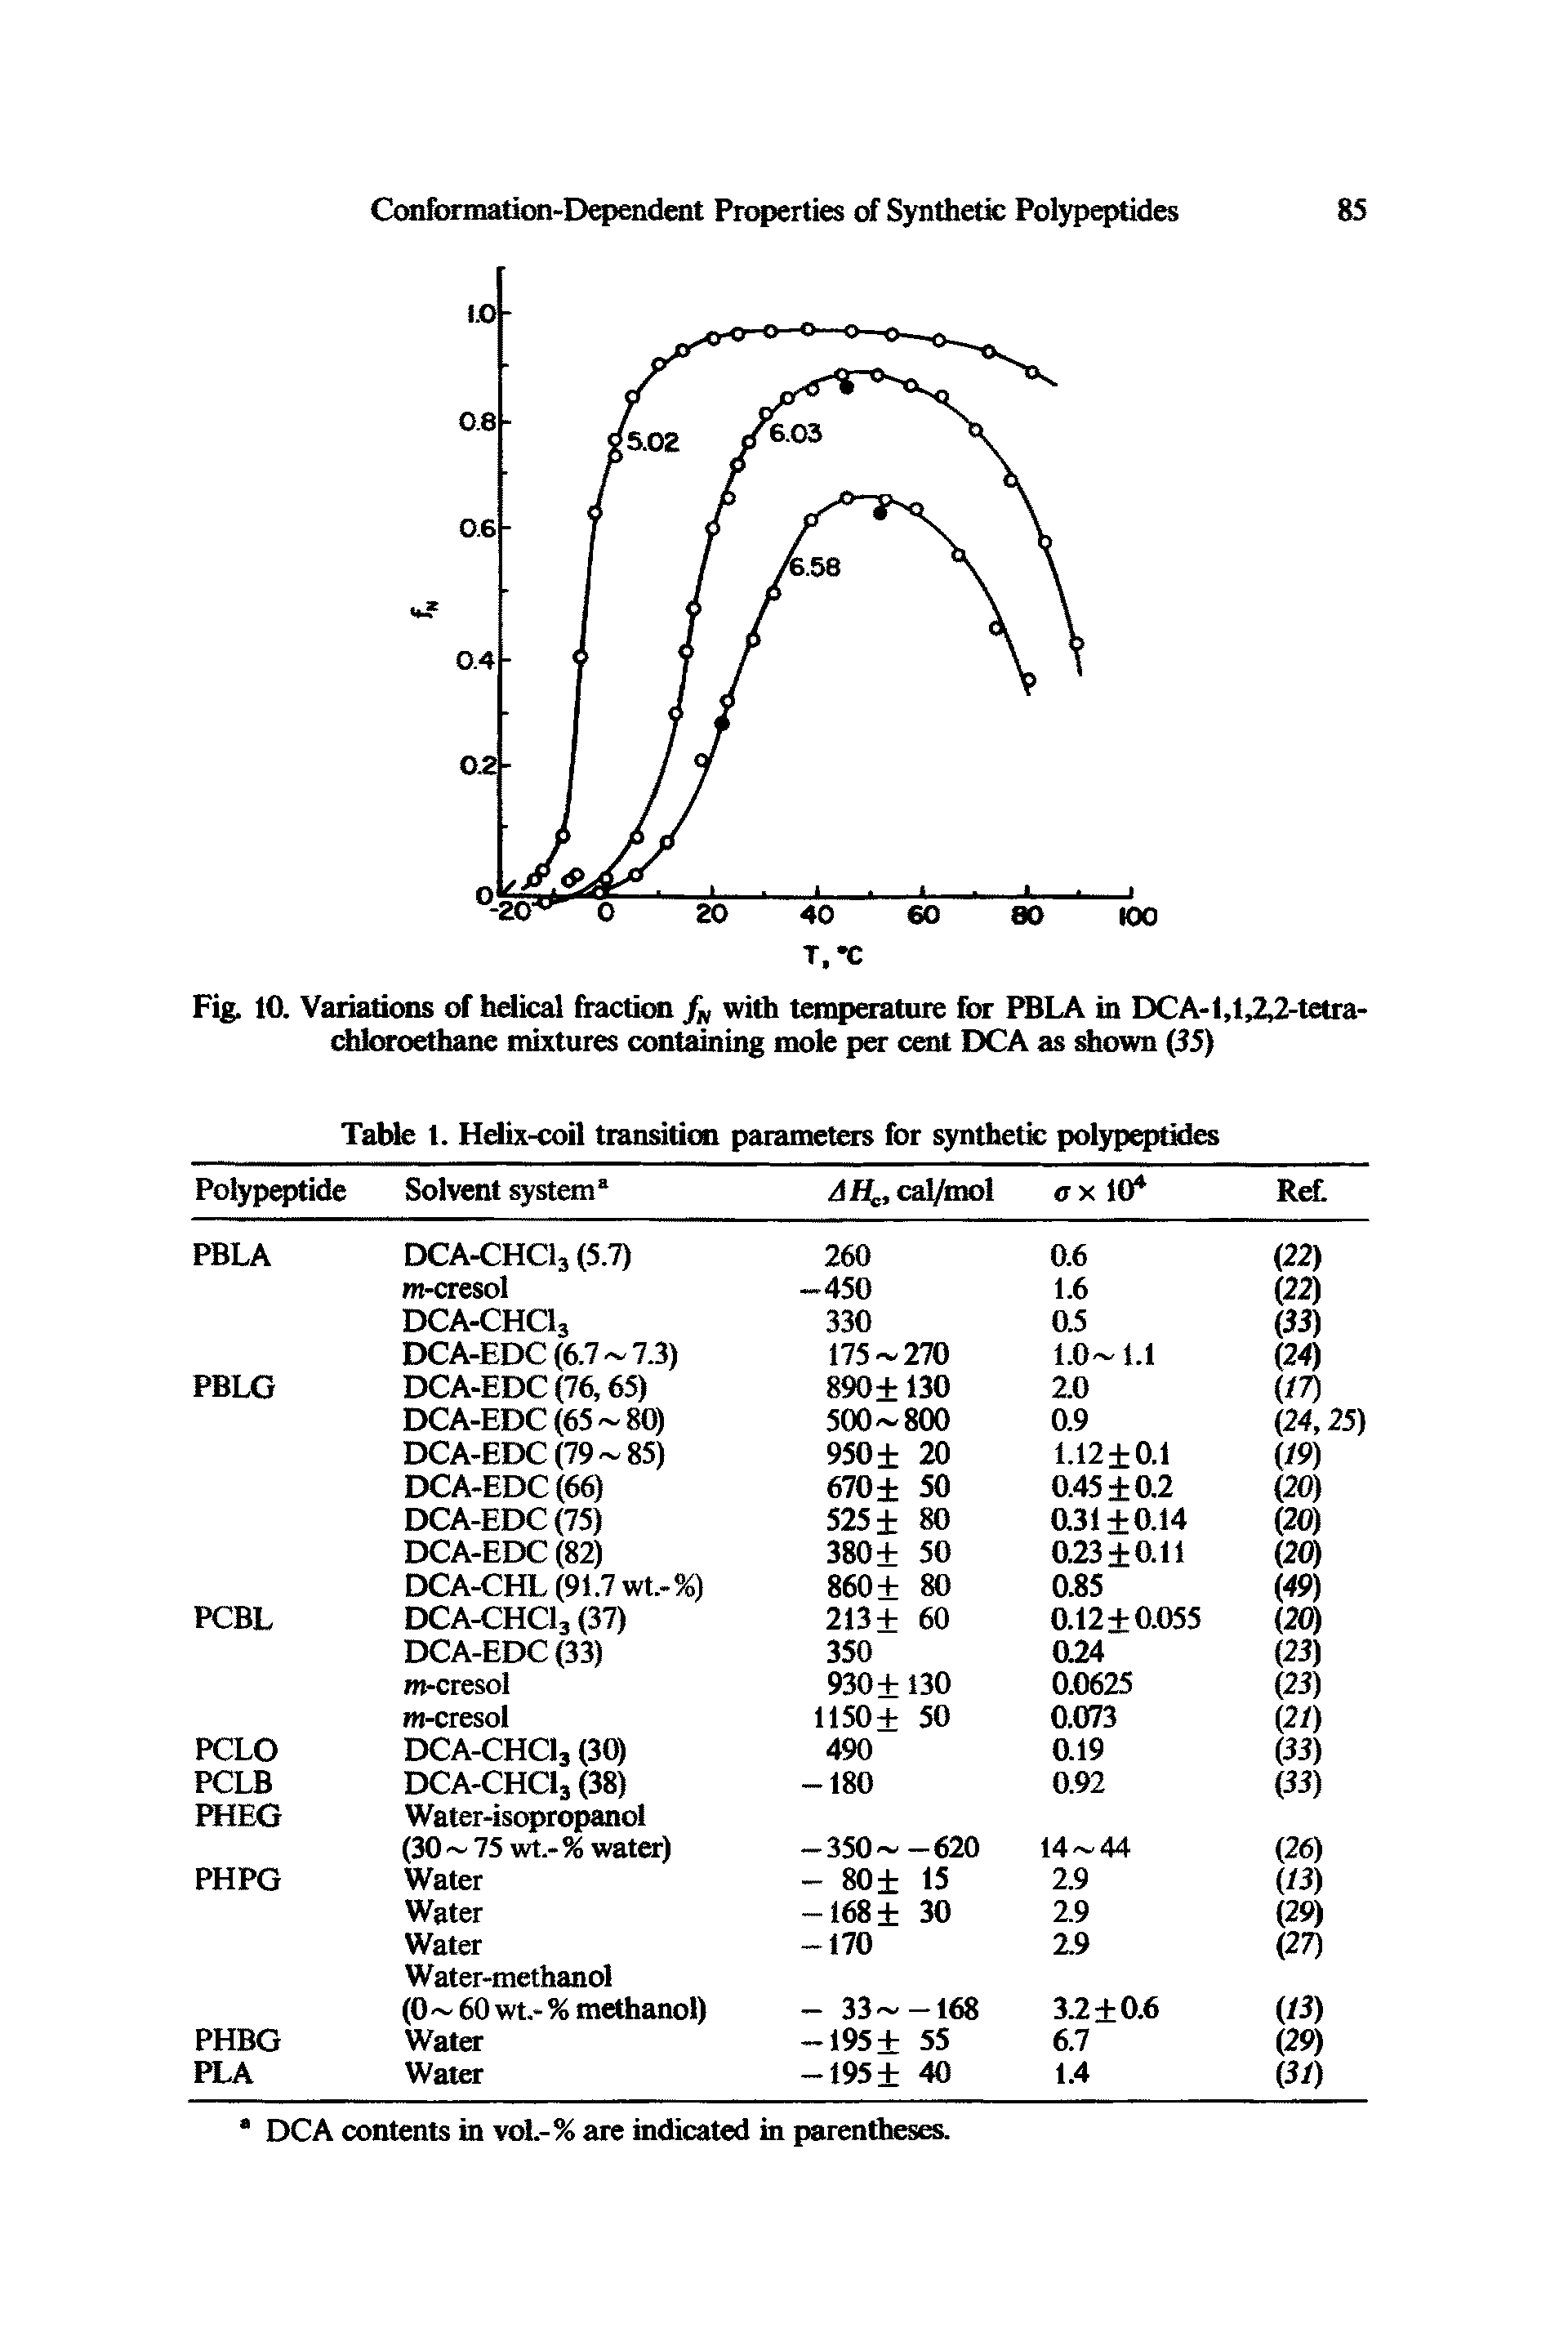 Fig. 10. Variations of helical fraction fN with temperature for PBLA in DCA-l,l,2,2-tetra-chloroethane mixtures containing mole per cent DCA as shown (55)...